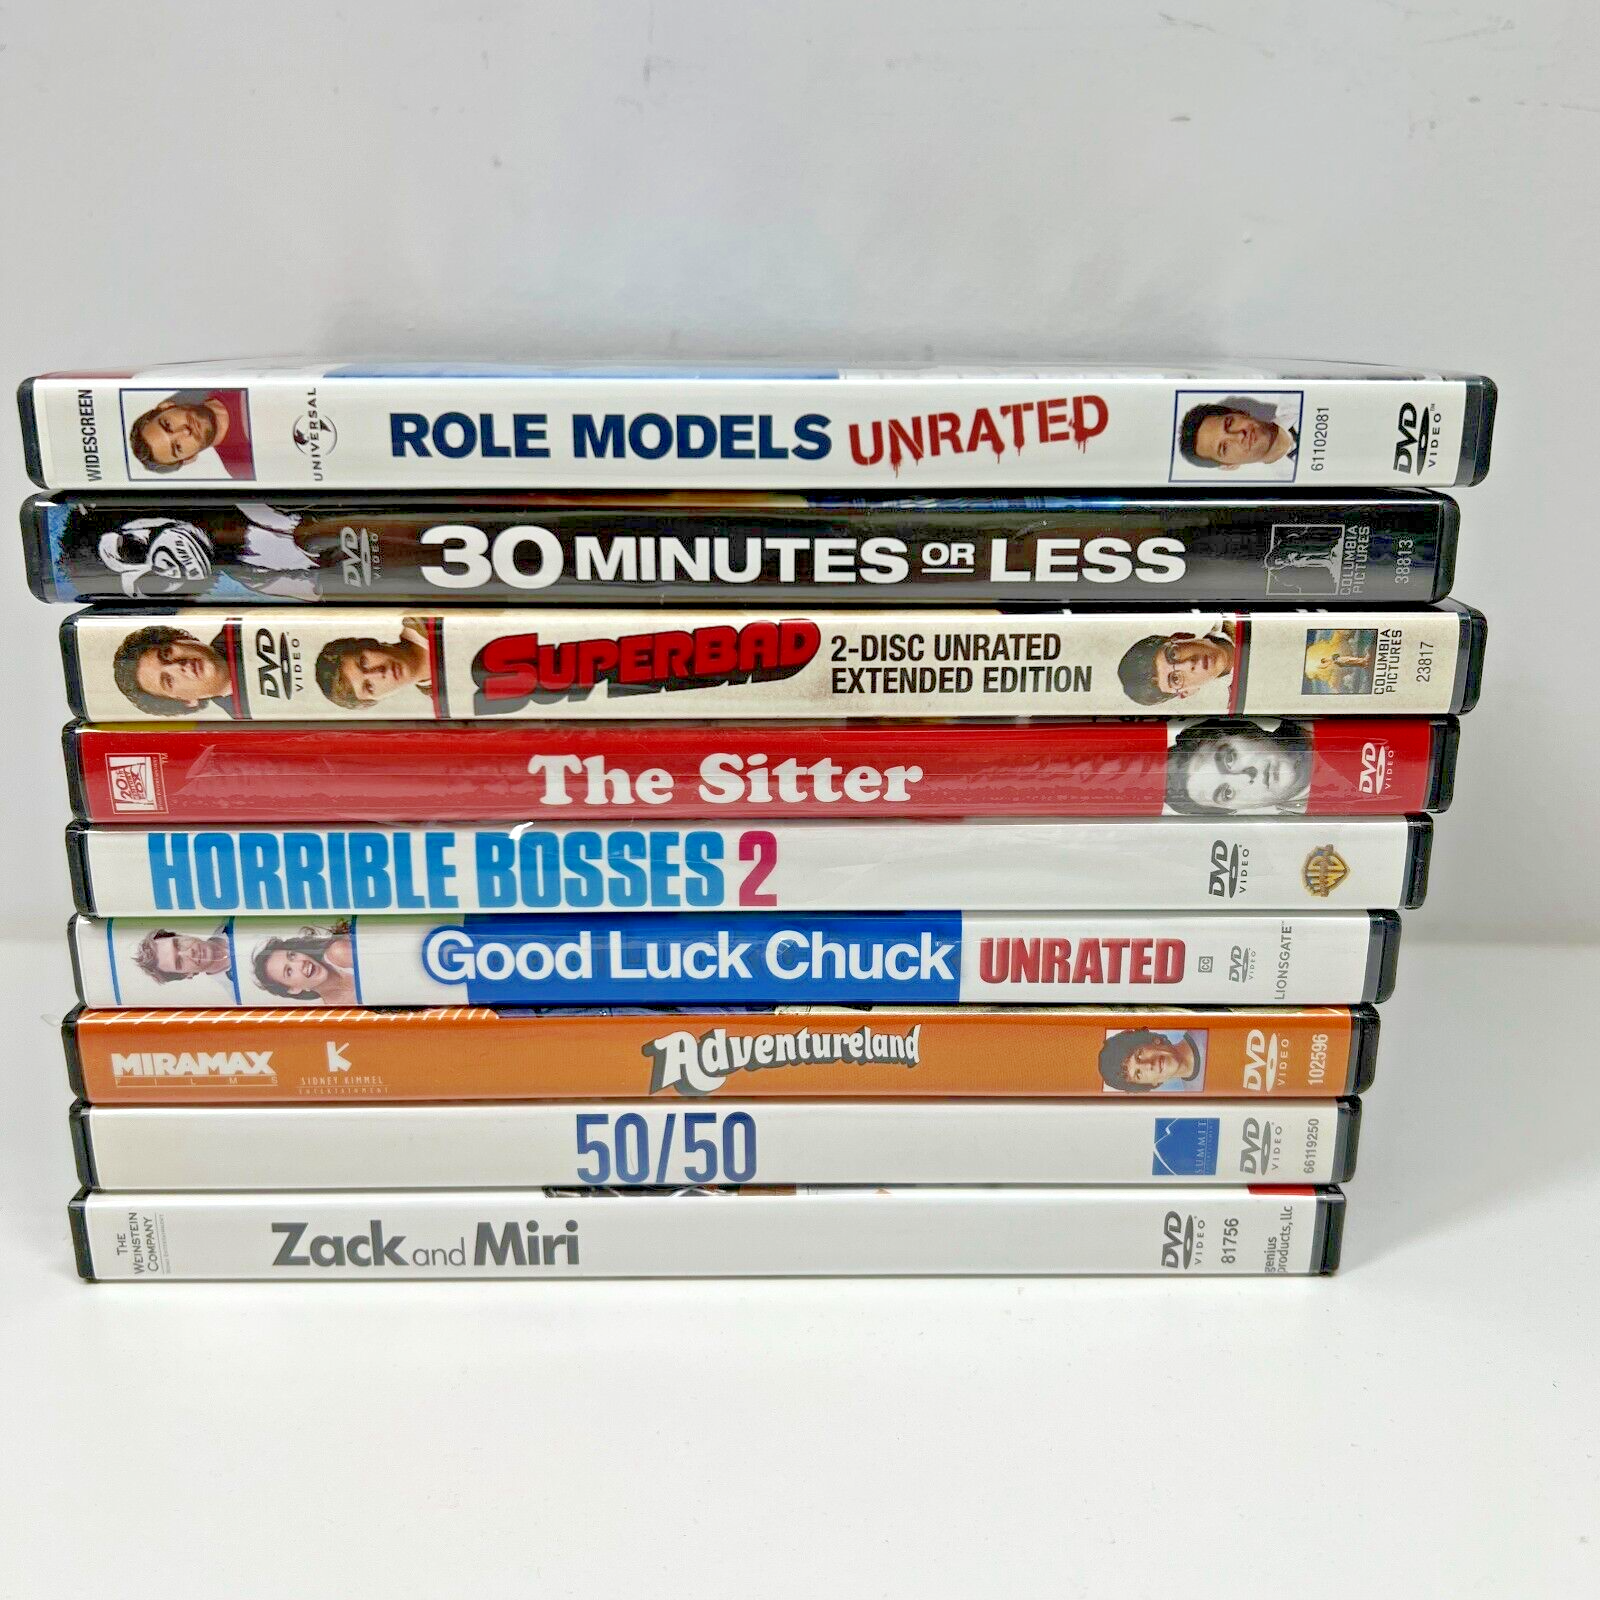 Lot of 9 Raunchy Comedy Movies DVDs Rated R and Unrated